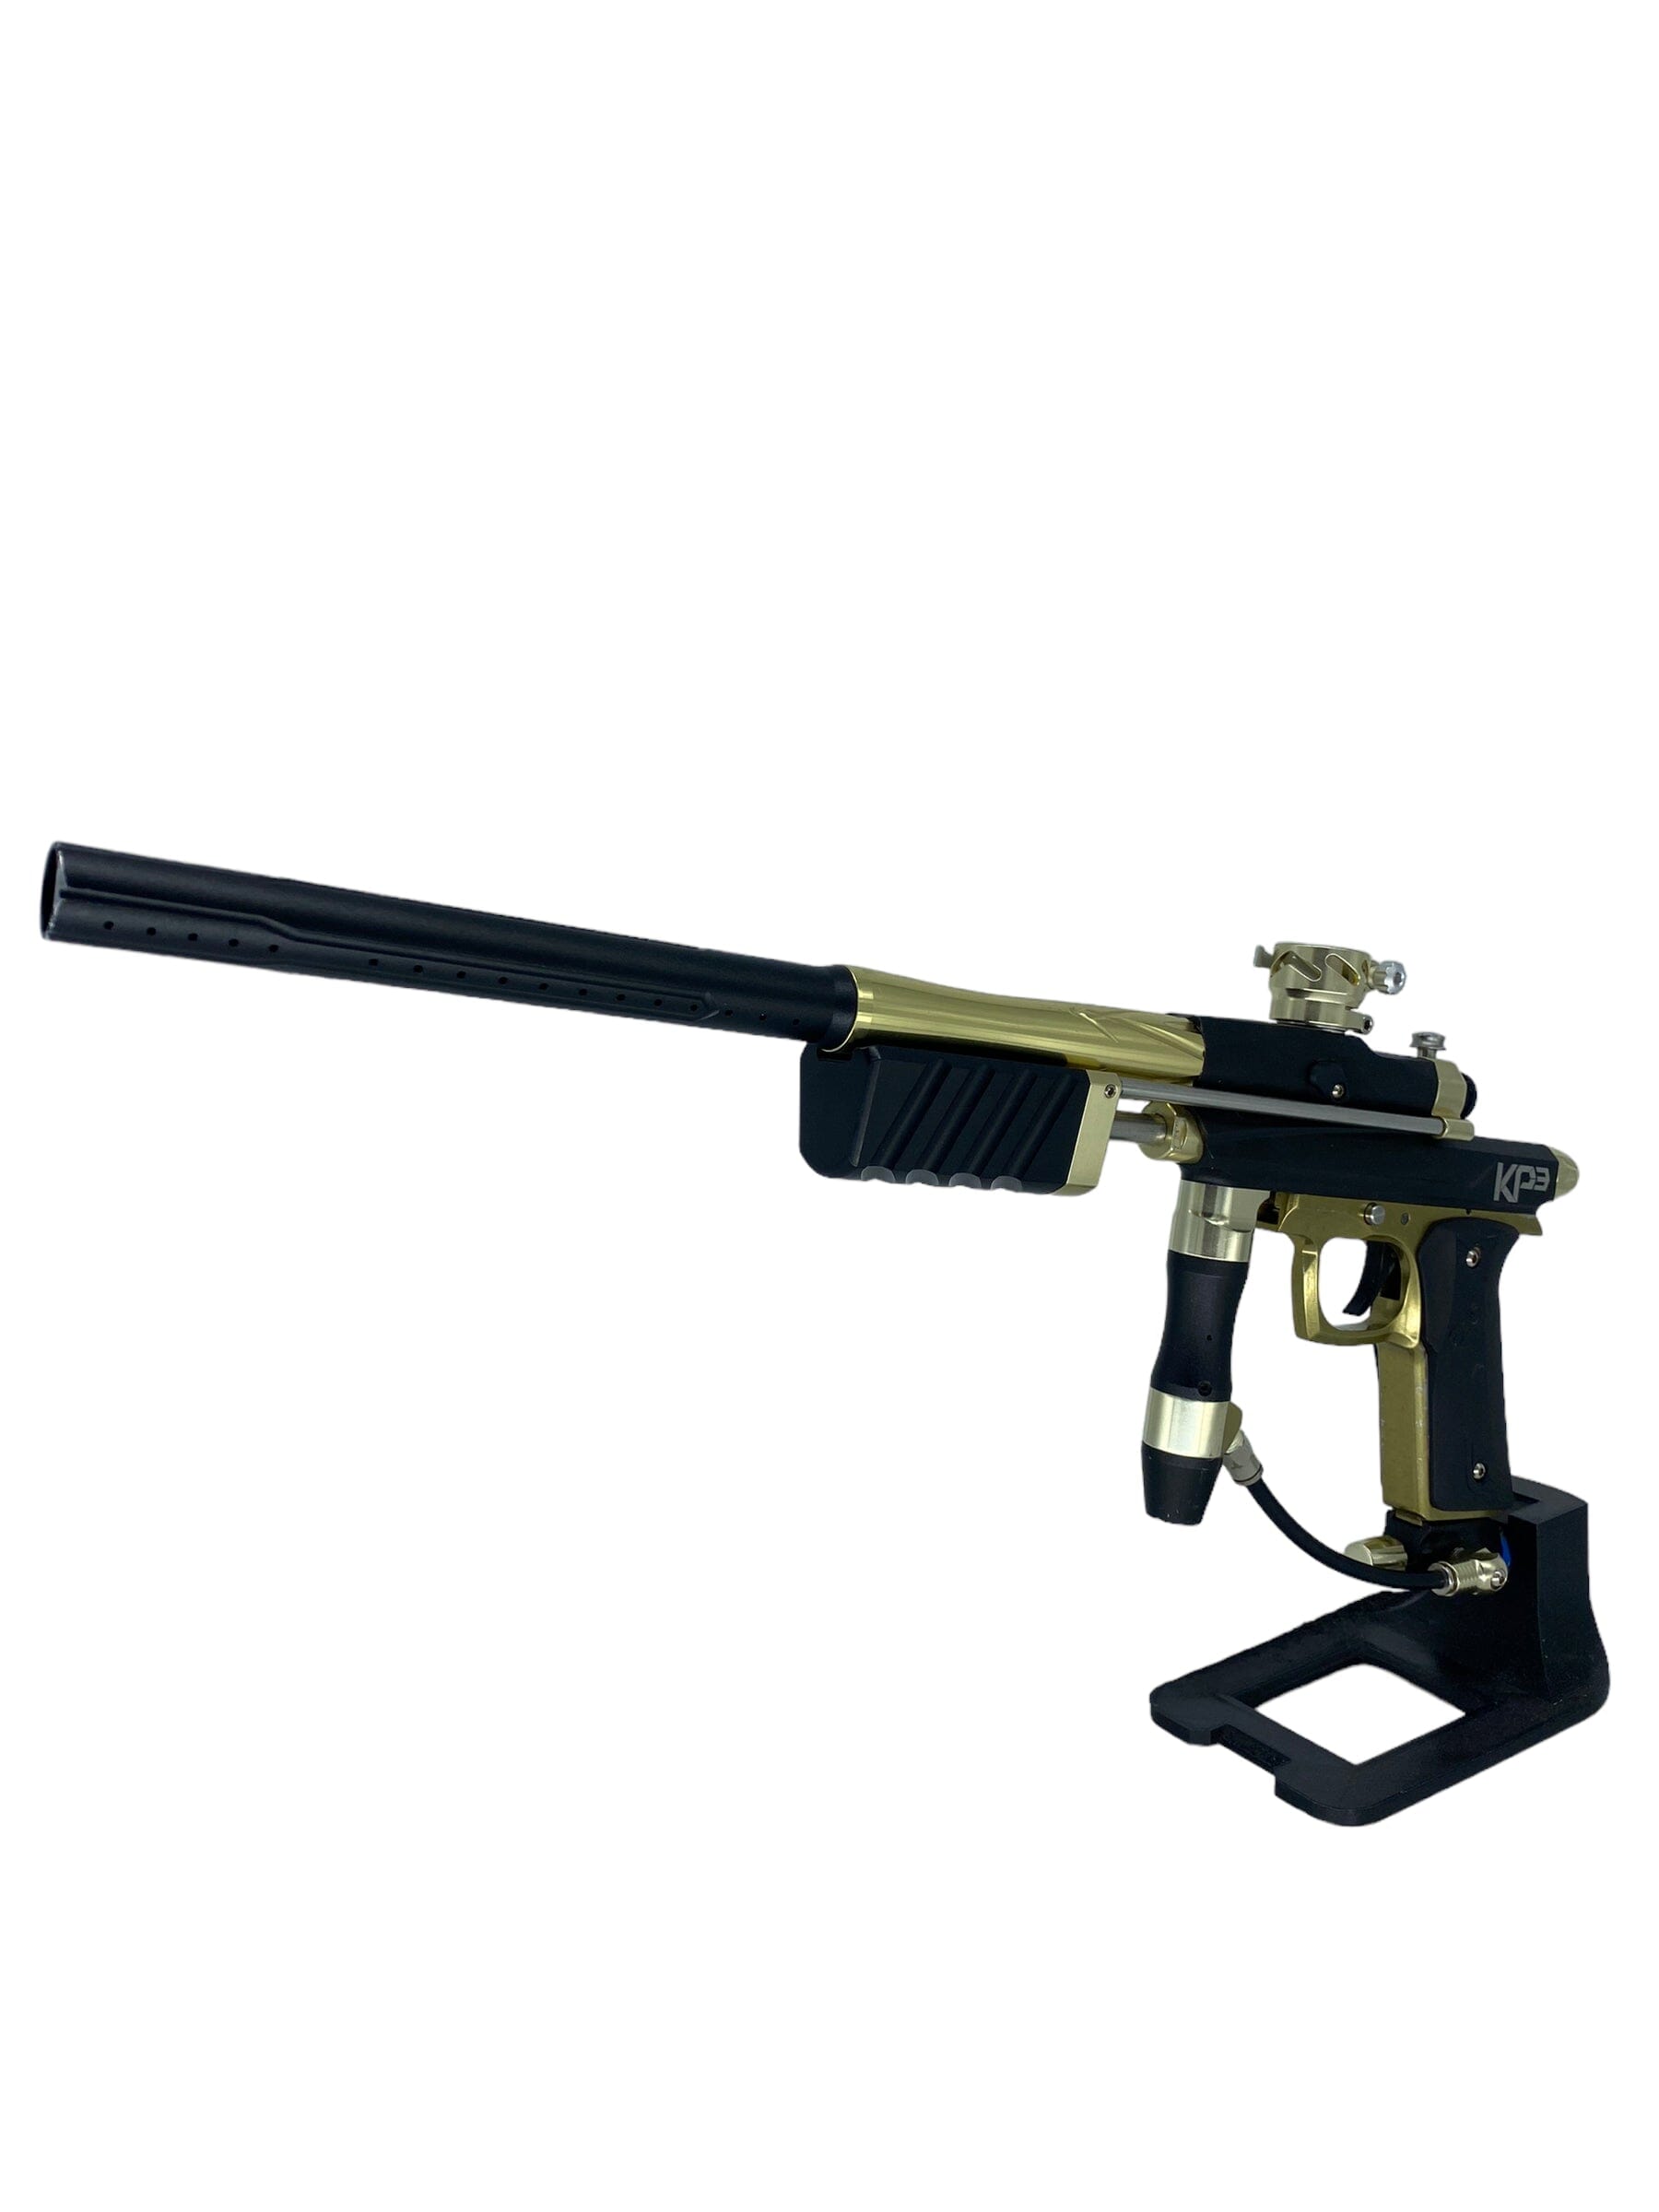 Used Azodin Kp3 Pump Gun Paintball Gun from CPXBrosPaintball Buy/Sell/Trade Paintball Markers, Paintball Hoppers, Paintball Masks, and Hormesis Headbands